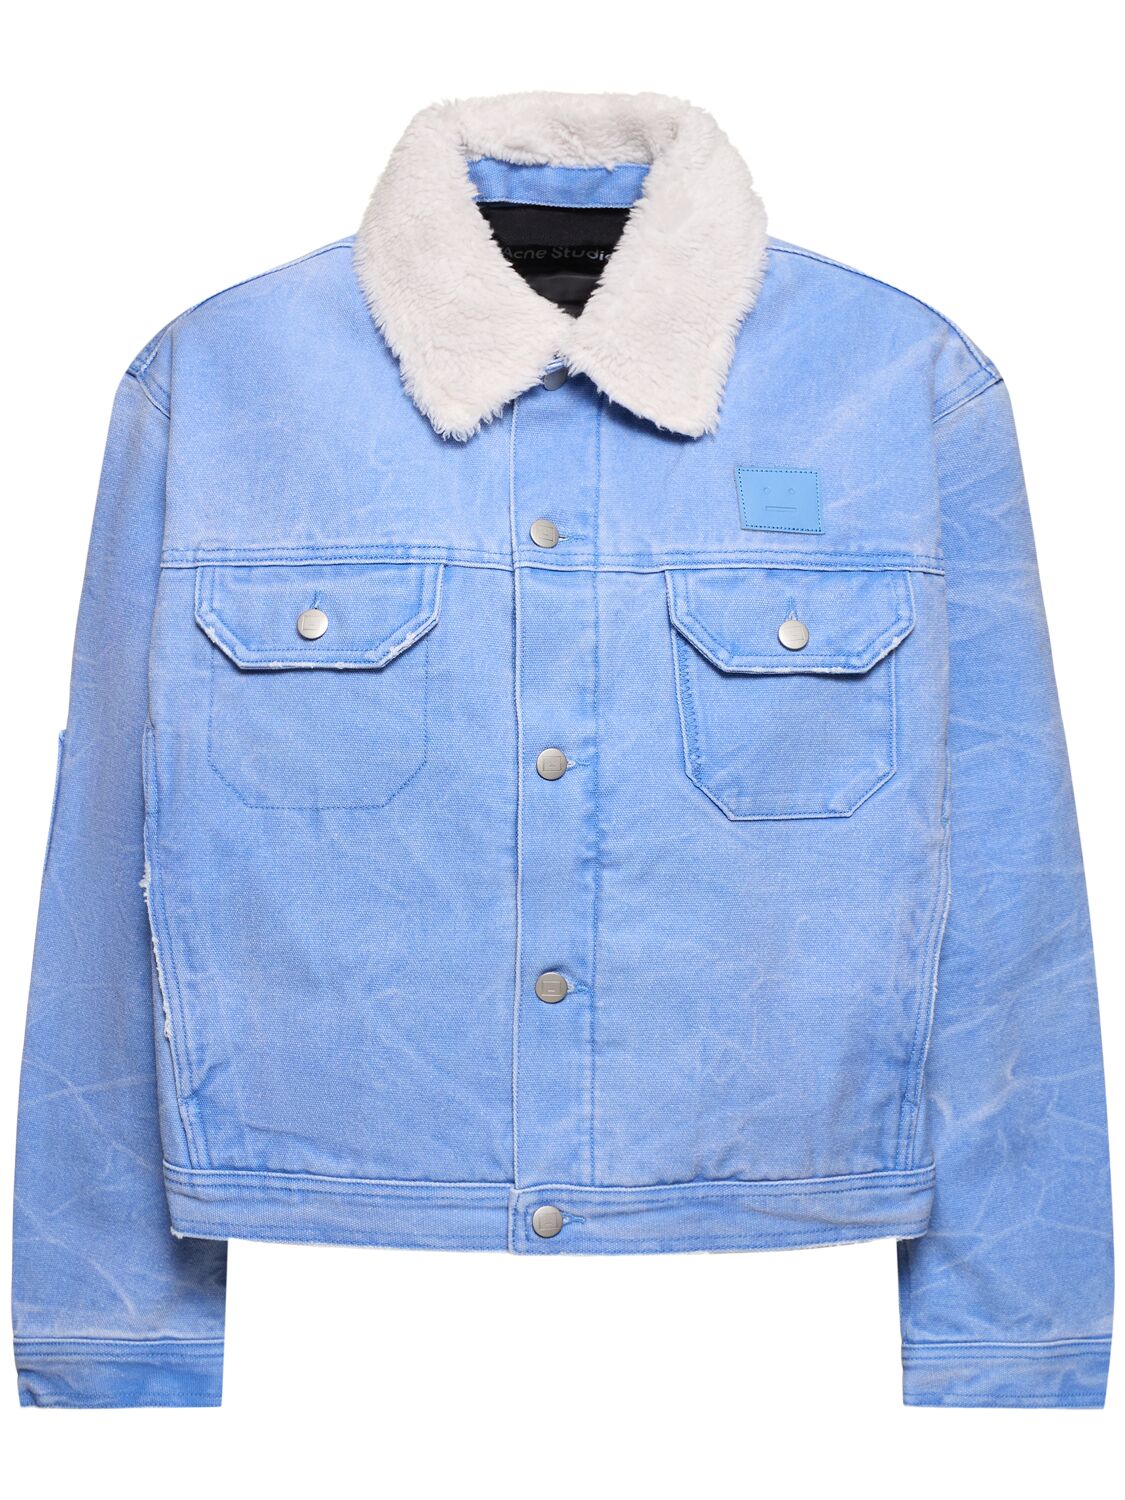 Acne Studios Cotton Denim Jacket With Shearling In Light Blue